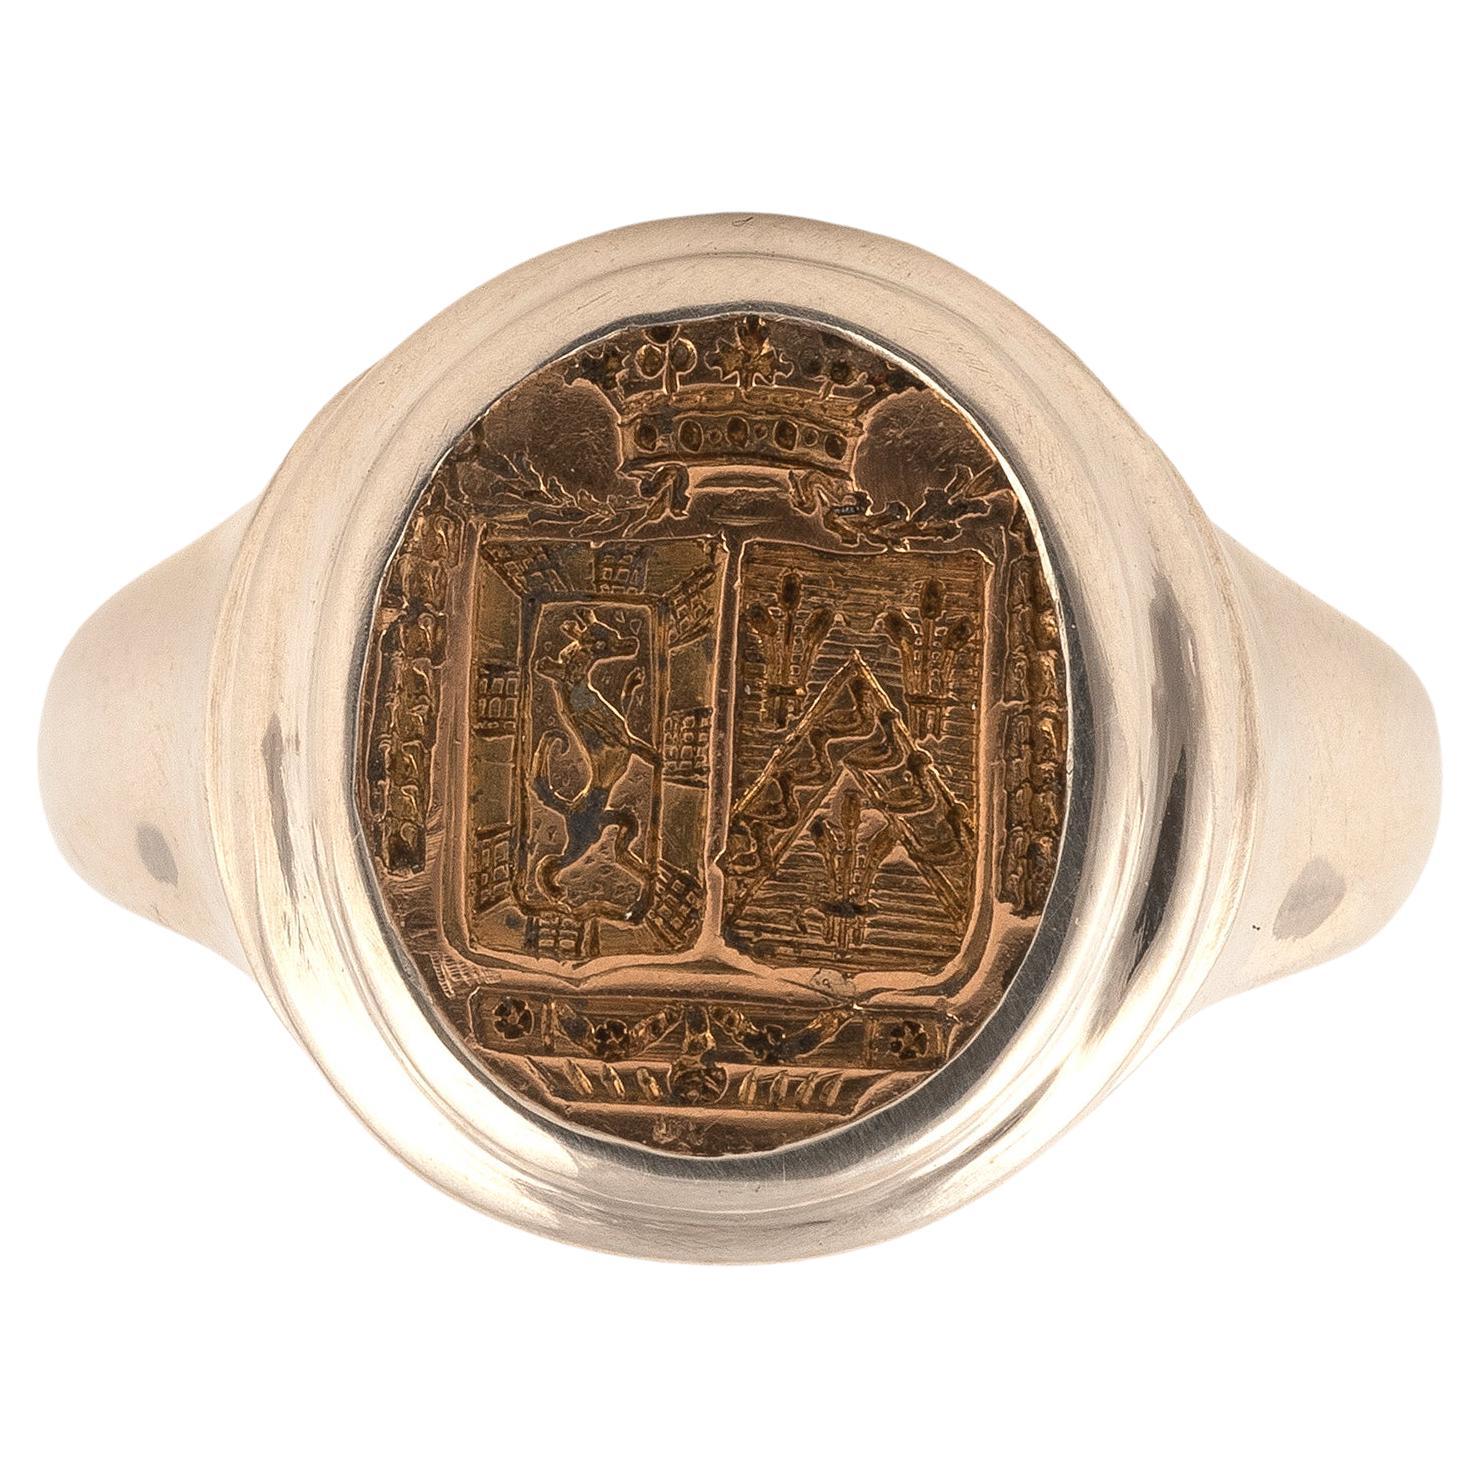 Yellow gold and Silver Signet ring, engraved a double coat of arms.
Ring size: 8 3/4
Weight: 13.1g. 